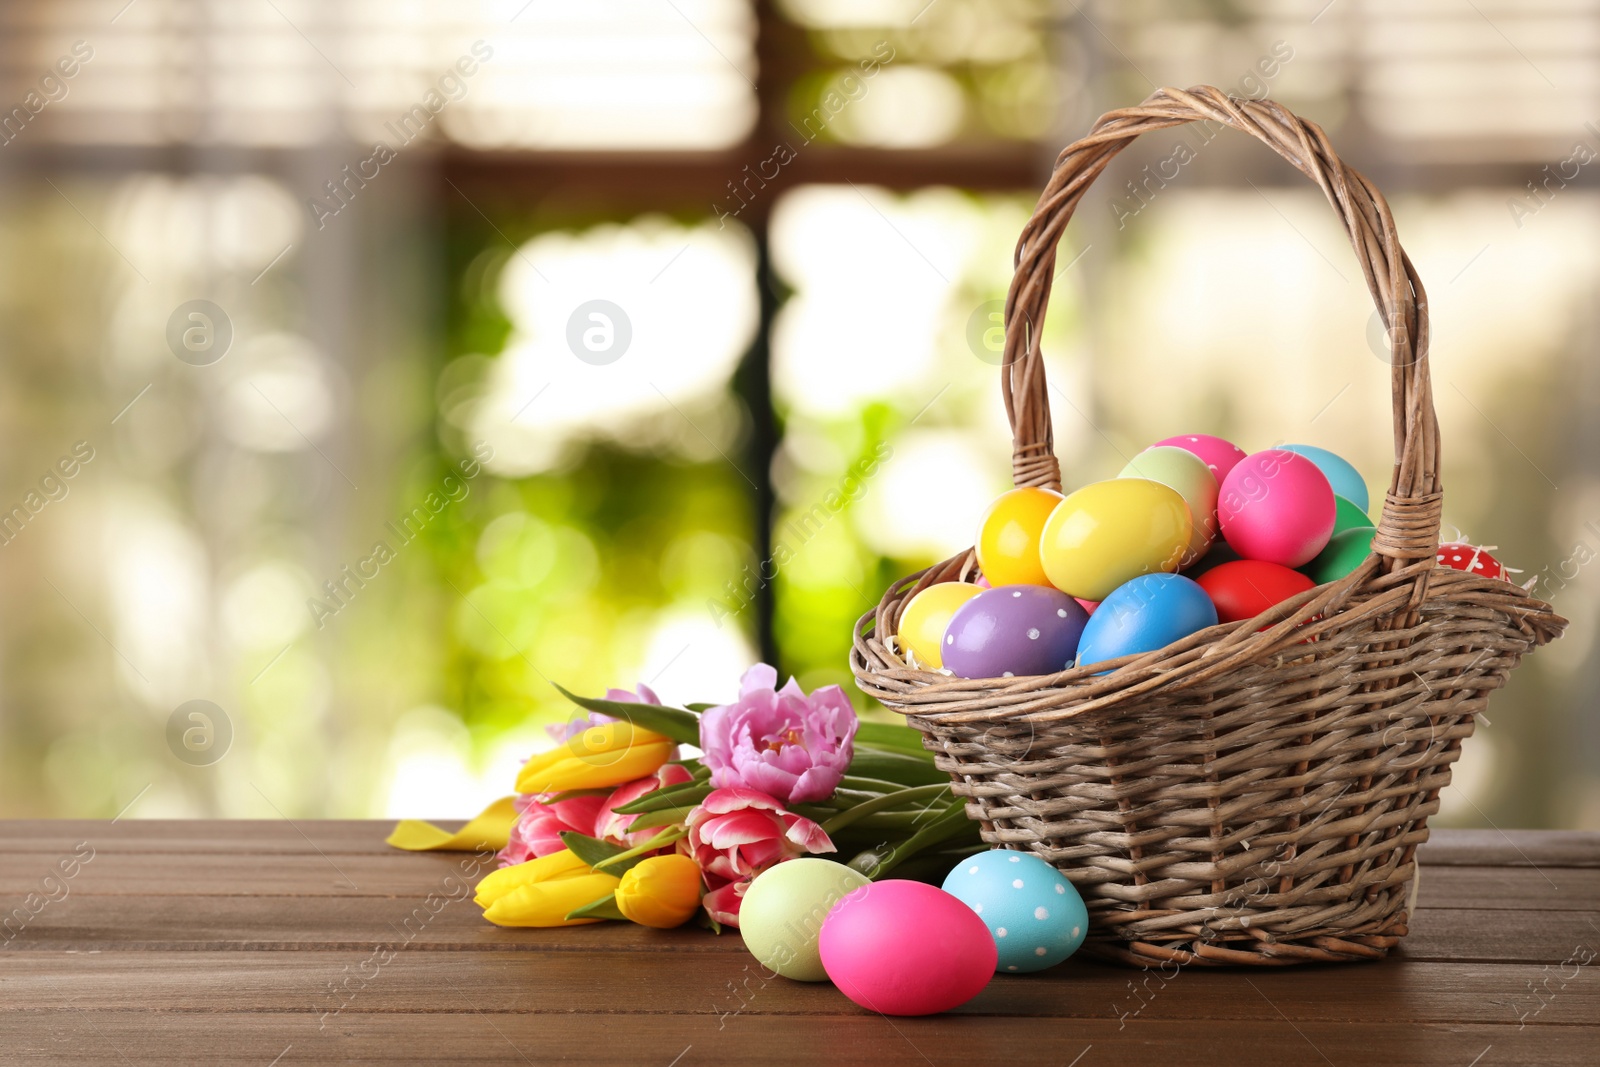 Image of Colorful Easter eggs in wicker basket and tulips on wooden table indoors, space for text